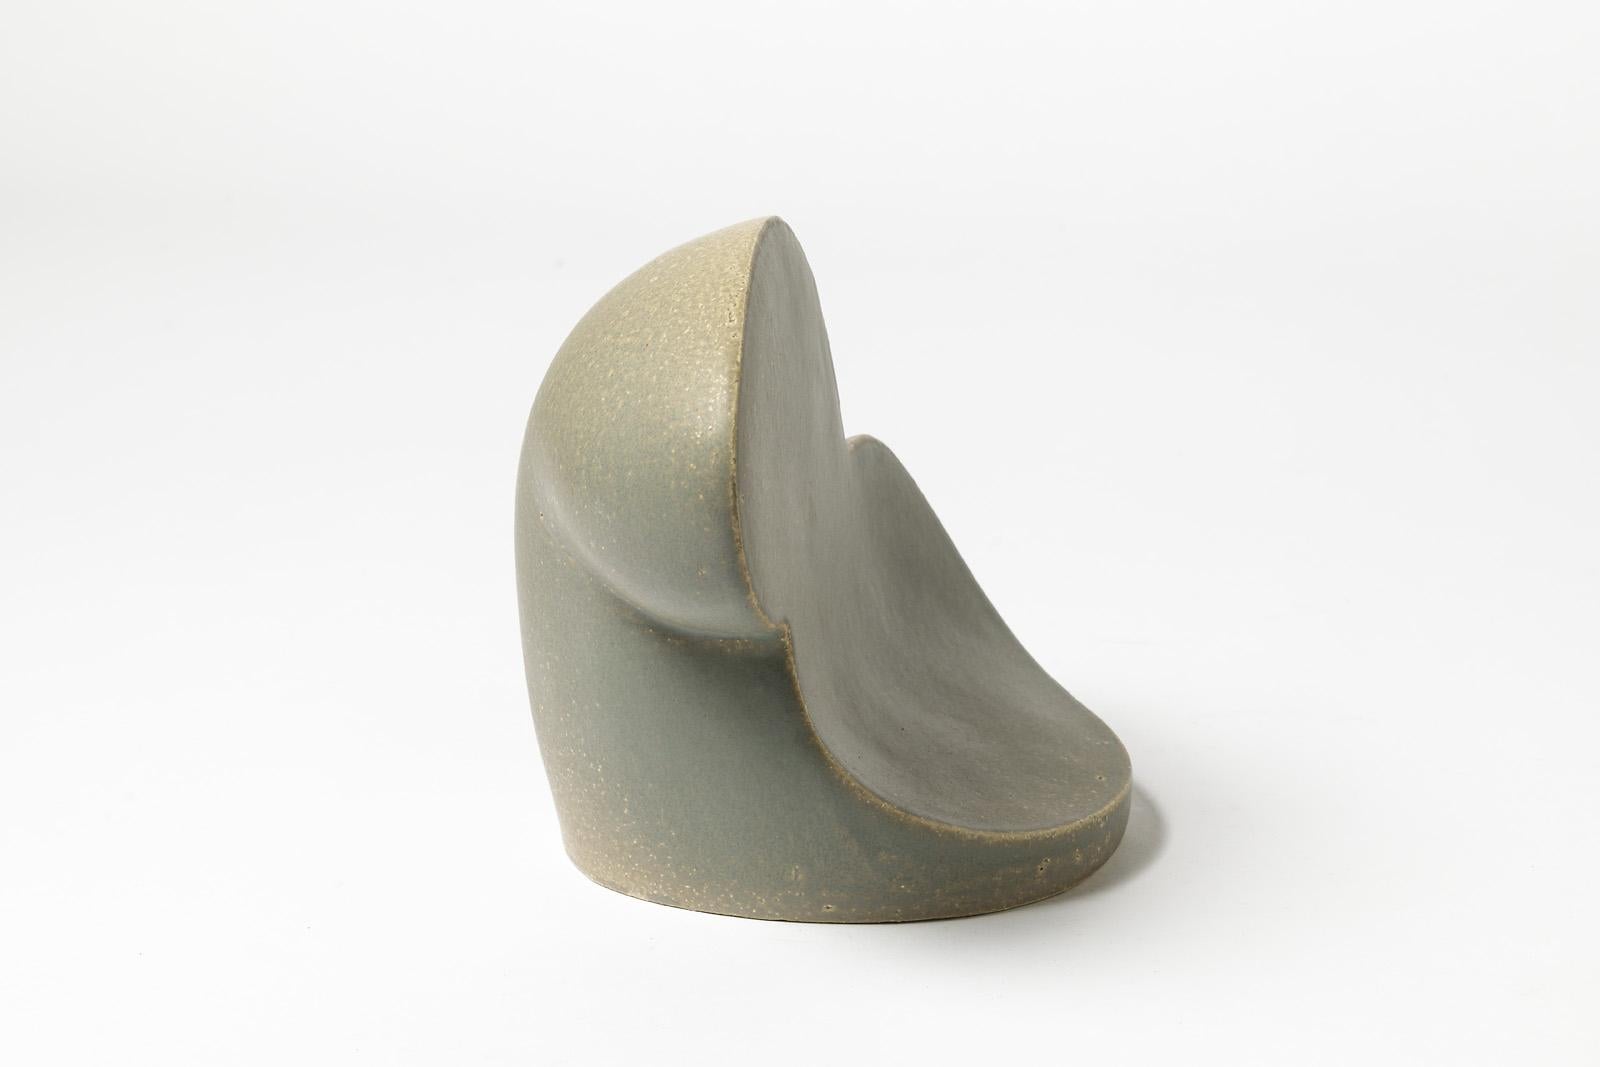 Contemporary and Decorative Ceramic Sculpture by Julia Huteau Abstract Form 2